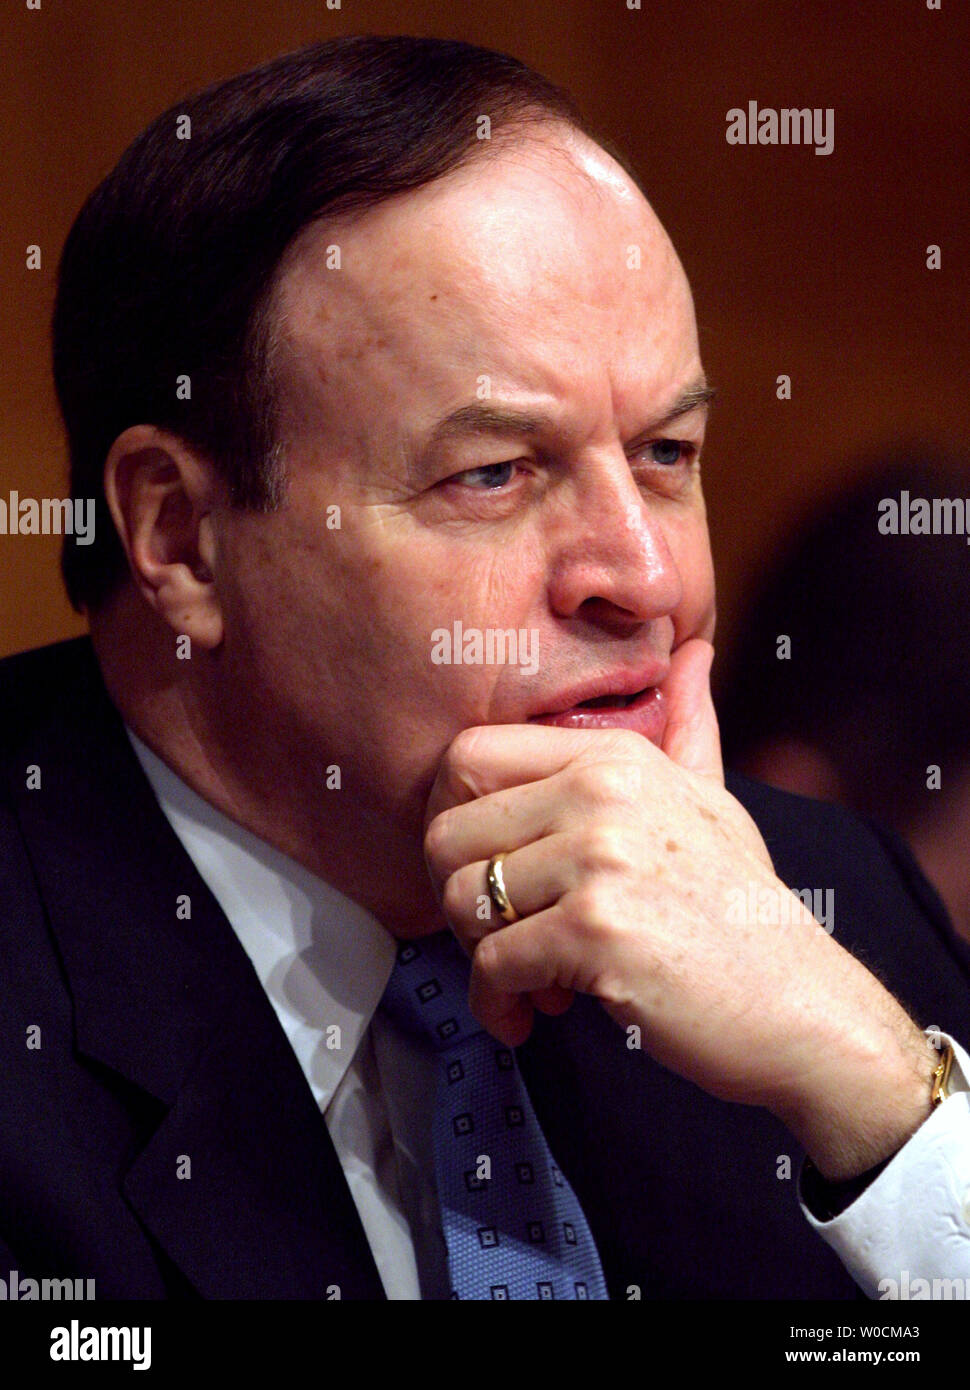 George Sauter, chief investment officer and managing director, The Vanguard Group, listens to members of the National Market Systems respond to questions on market regulations and developments at a Senate Banking, Housing and Urban Affairs Committee meeting at the Dirksen Senate Office Building in Washington, DC on May 18, 2005. (UPI Photo/Kevin Dietsch) Stock Photo